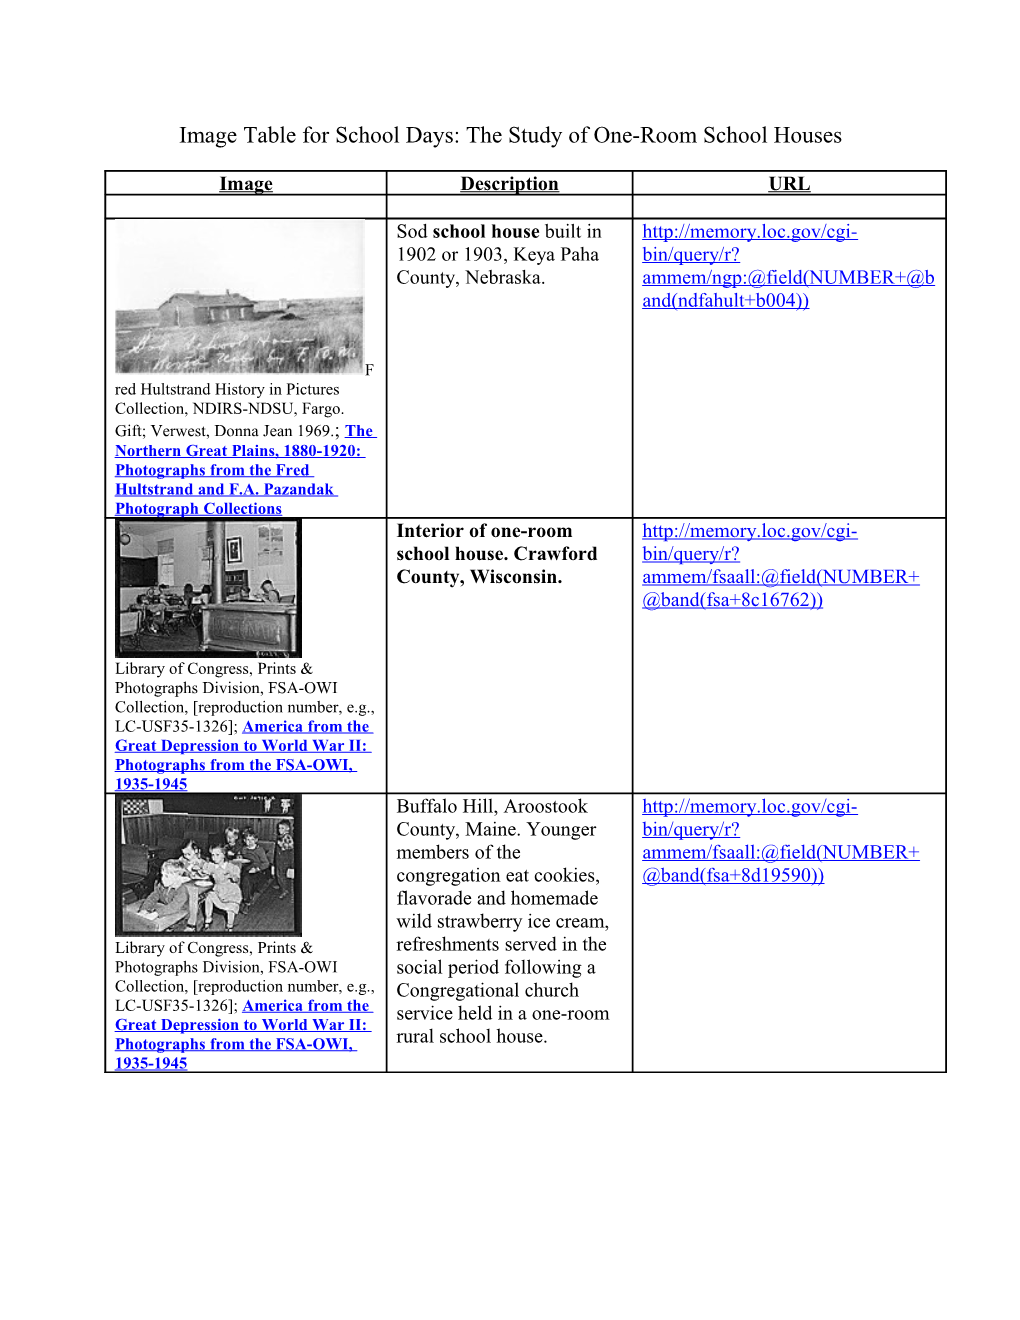 Image Table for School Days: the Study of One-Roomschool Houses